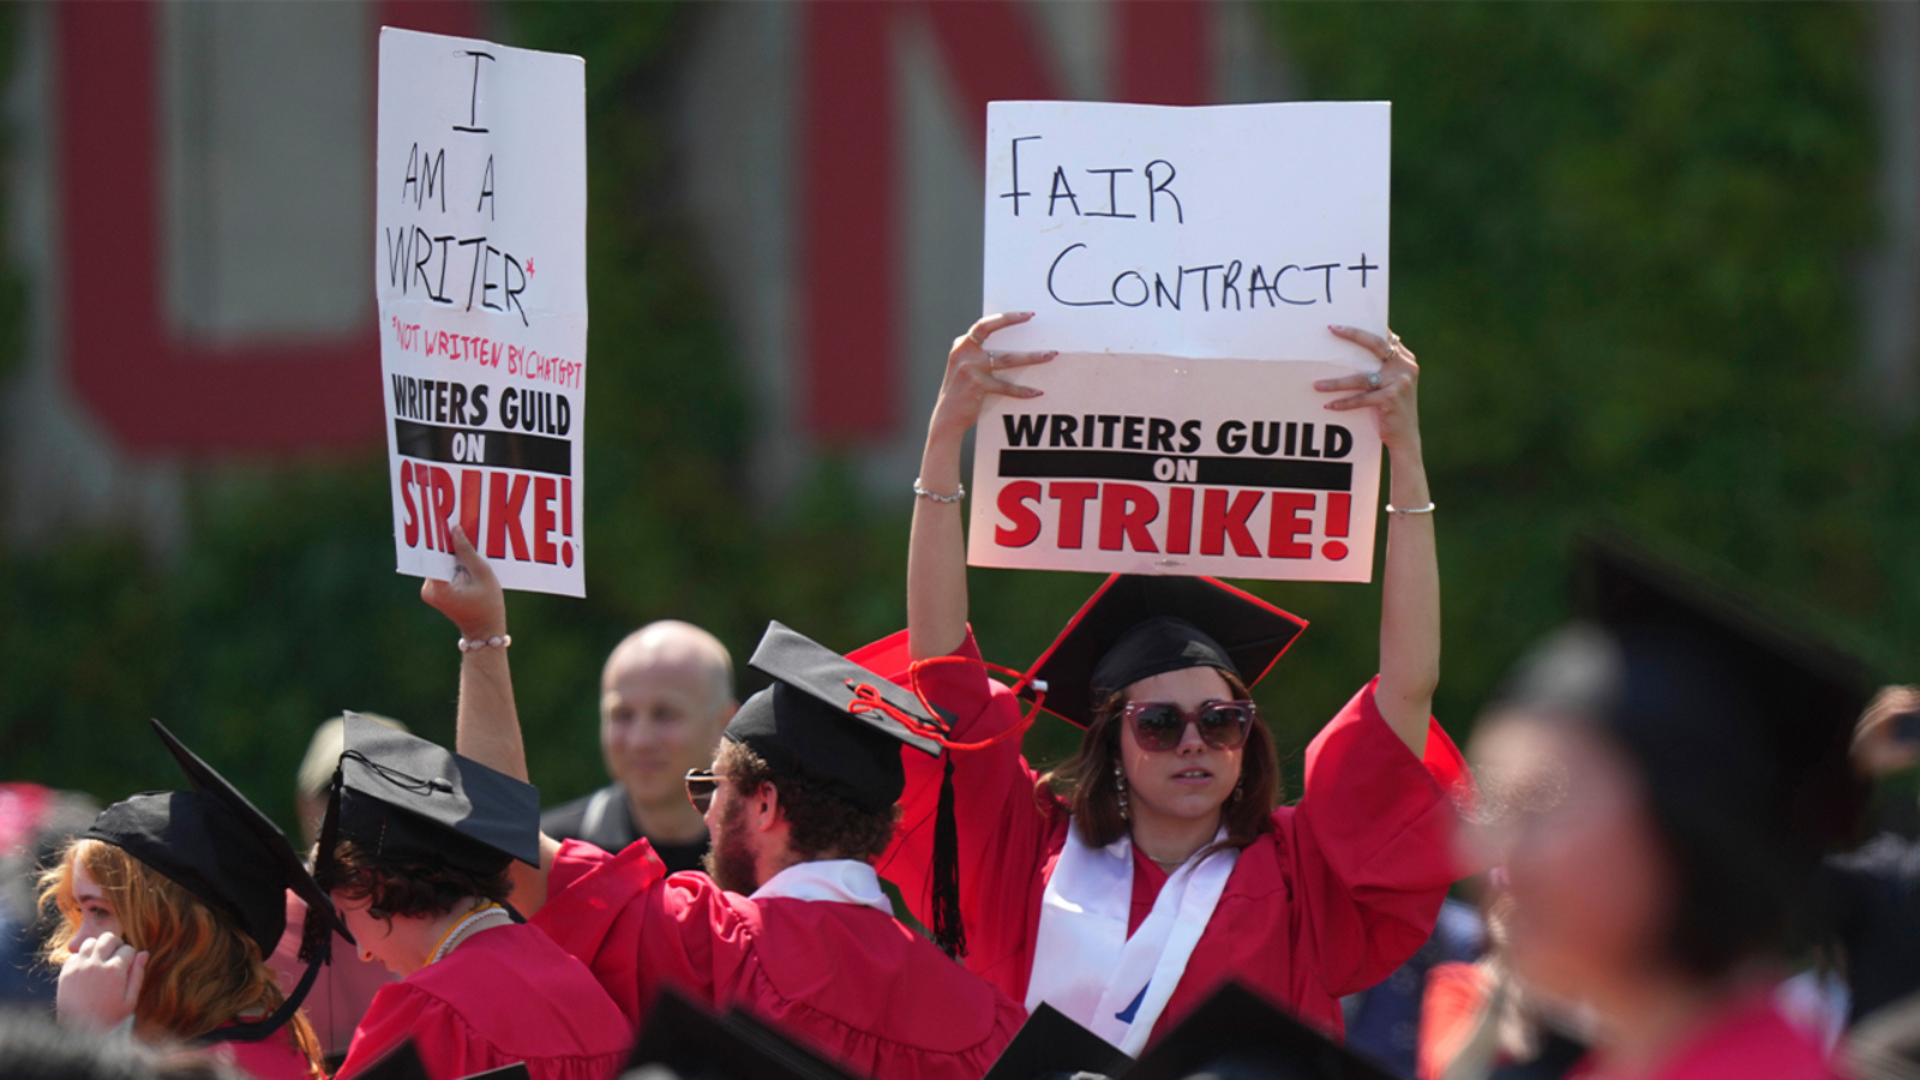 Boston grad joins writers' protest for fair wages